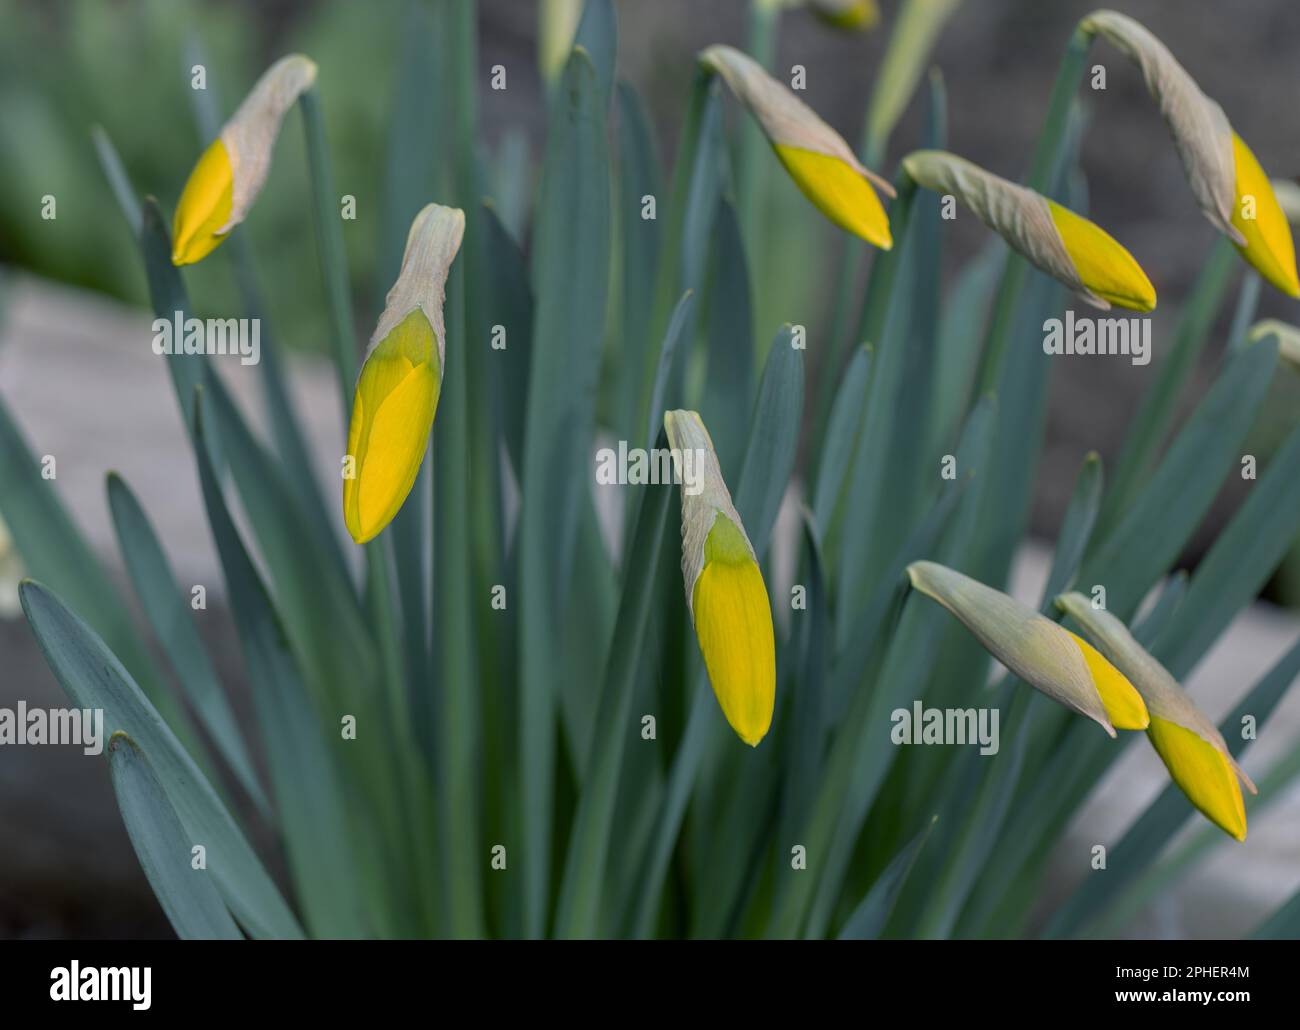 Flowers of yellow narcissus. Wonderful beautiful first spring flowers close-up in good quality. Beautiful floral background for a romantic greeting ca Stock Photo